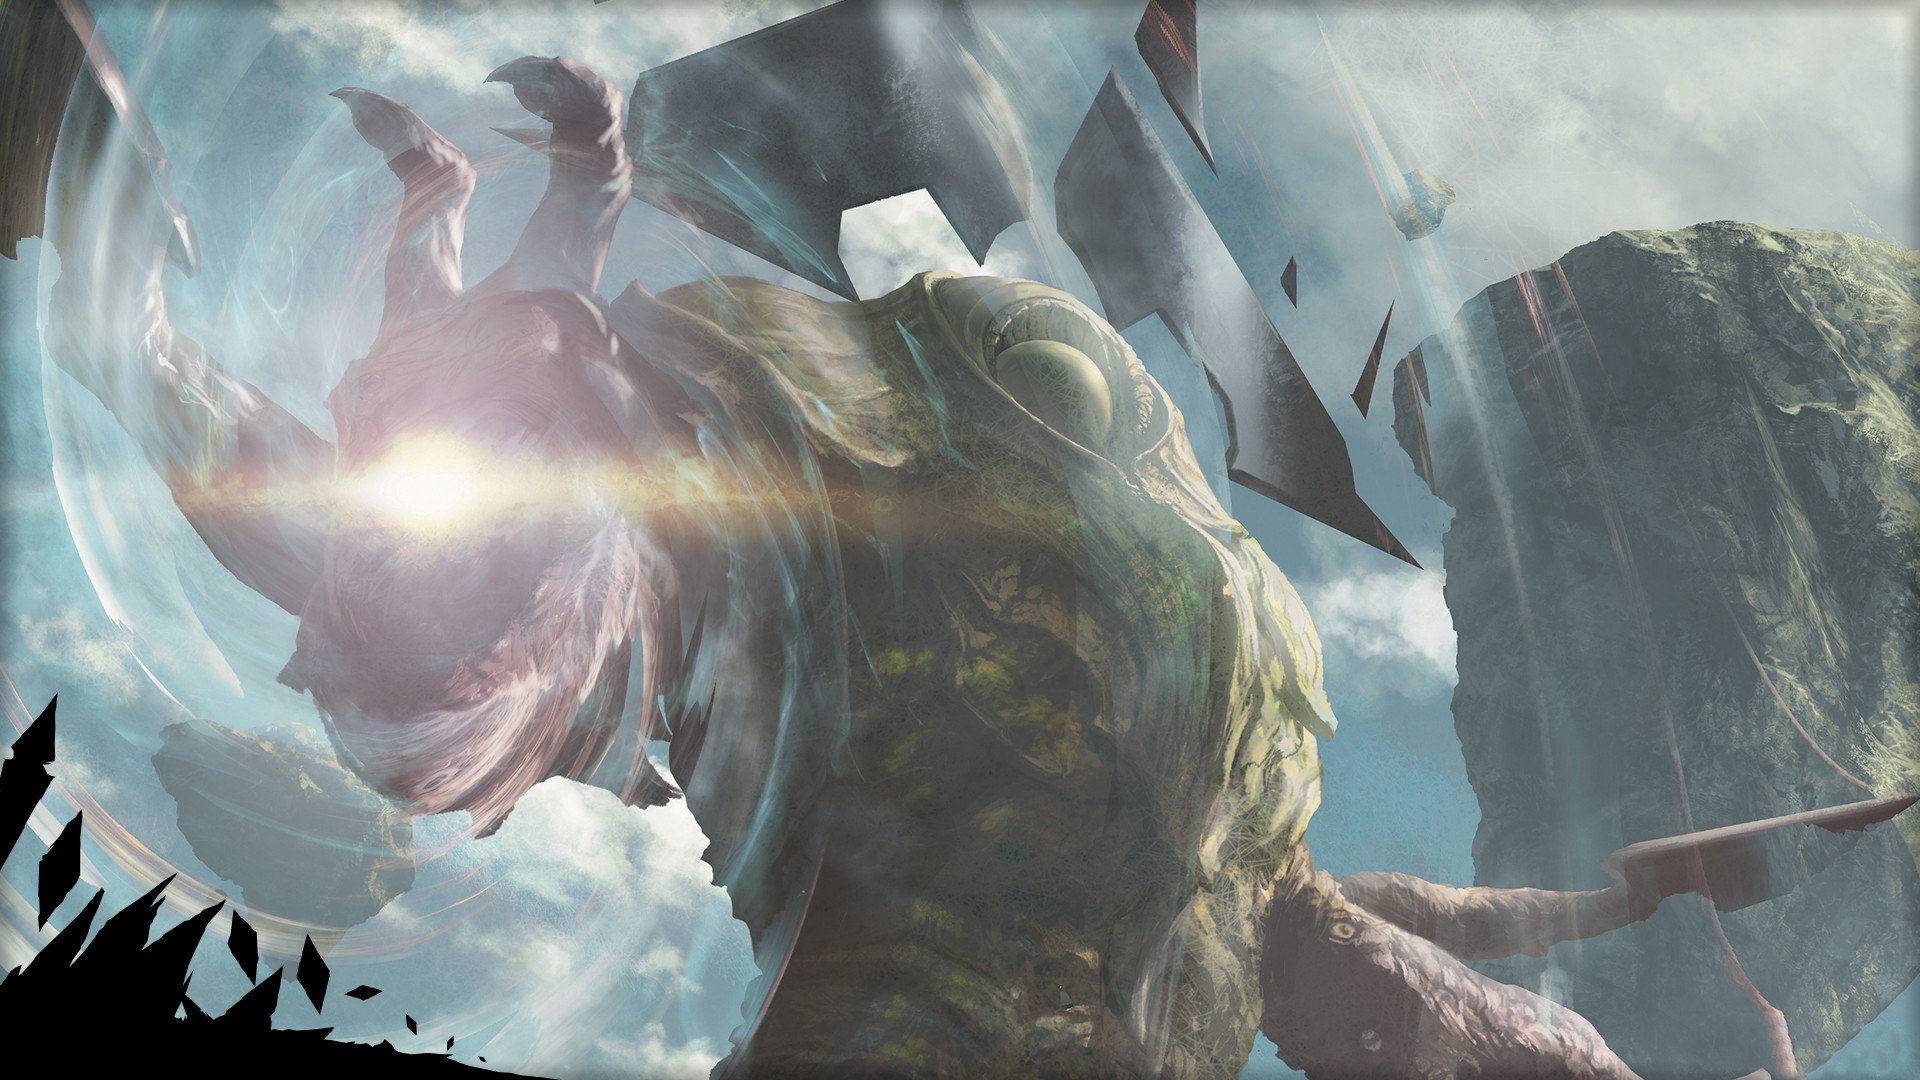 1920x1080 2kPPBh4 Magic: The Gathering Set Review - Oath of the Gatewatch. “